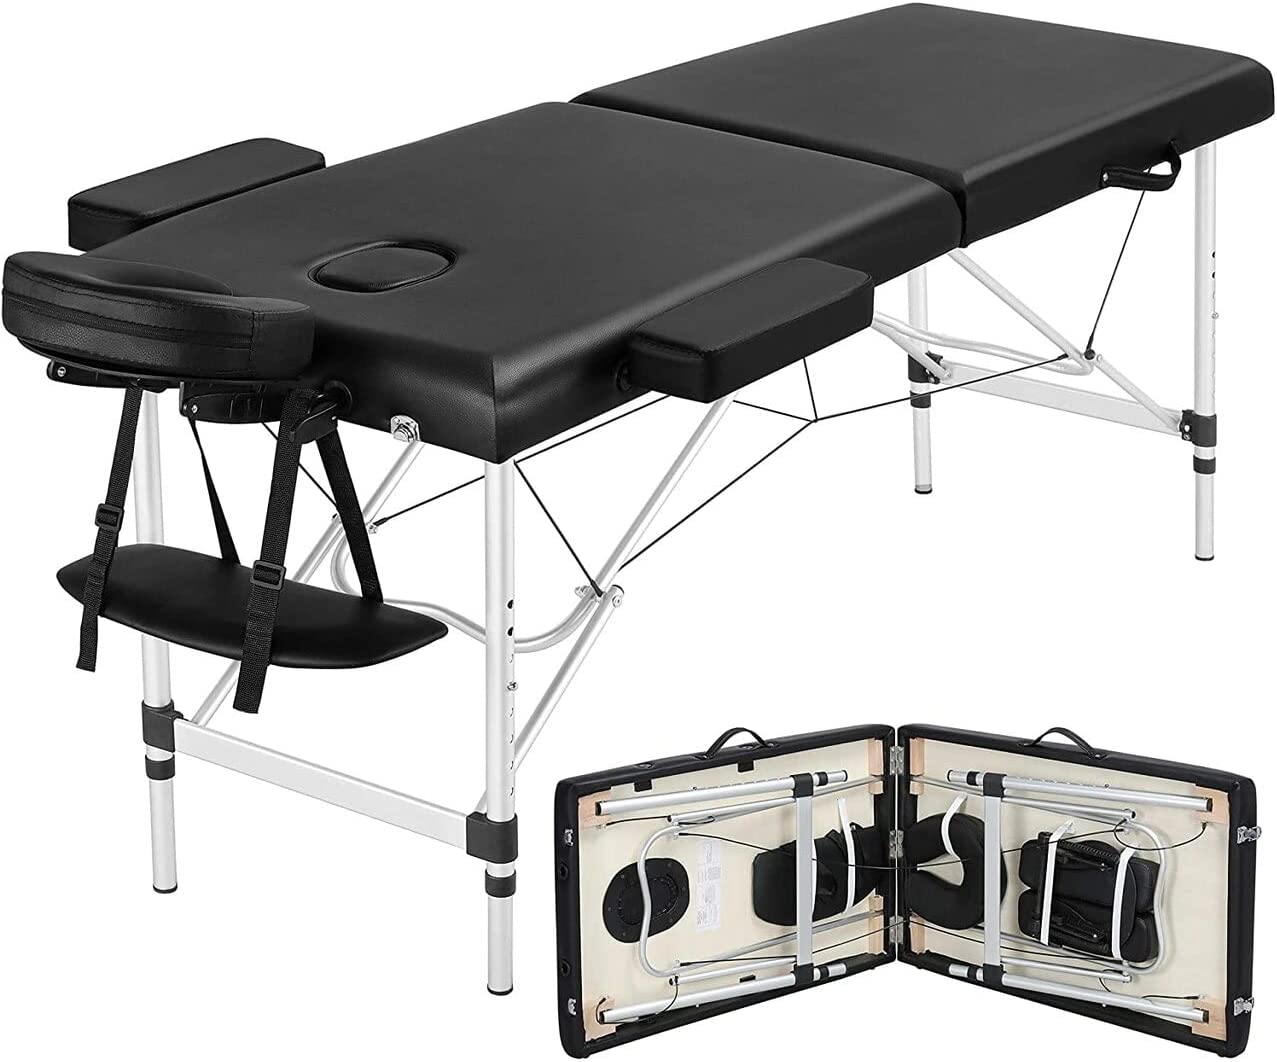 COOLBABY Portable Fitness Massage Table - Professional Adjustable Folding Bed for Ultimate Relaxation Time - COOL BABY